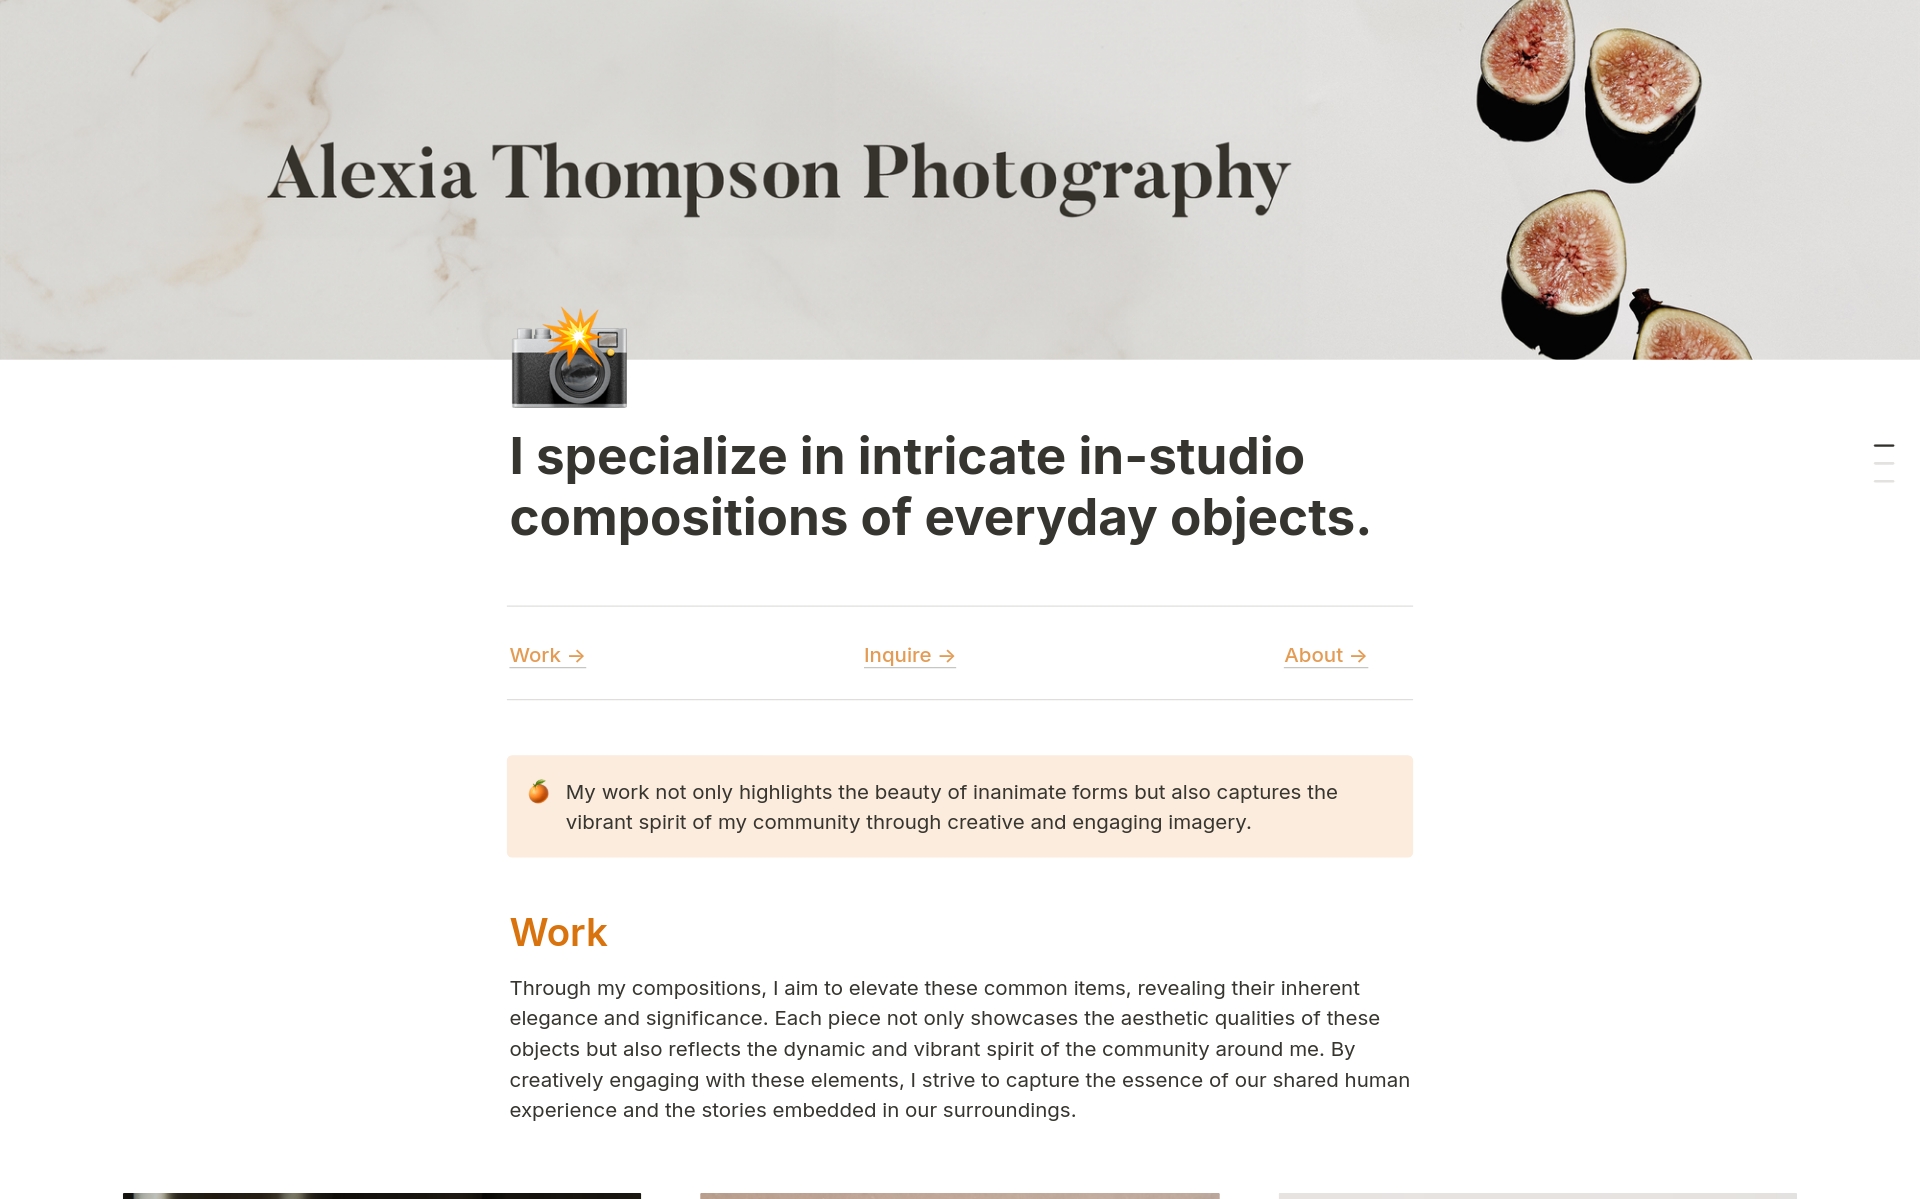 A photography portfolio and website template for freelance photographers and artists to showcase their work and services.